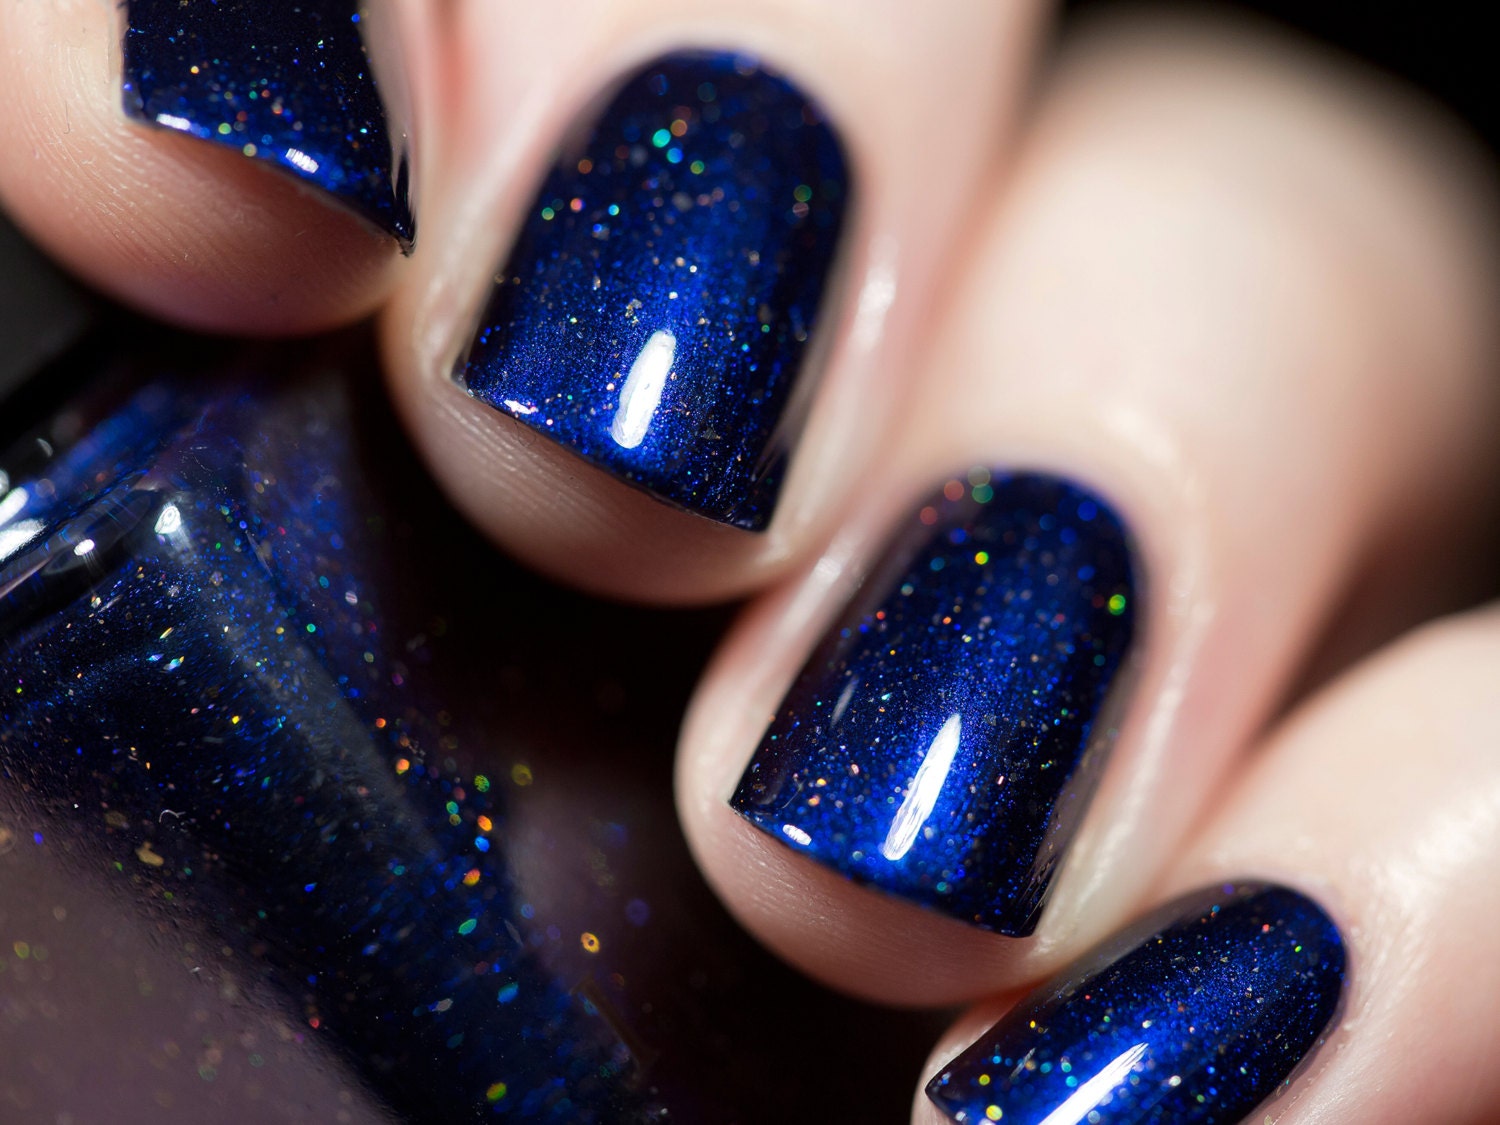 9. "Midnight Black" nail polish for a sophisticated and edgy anniversary look - wide 1